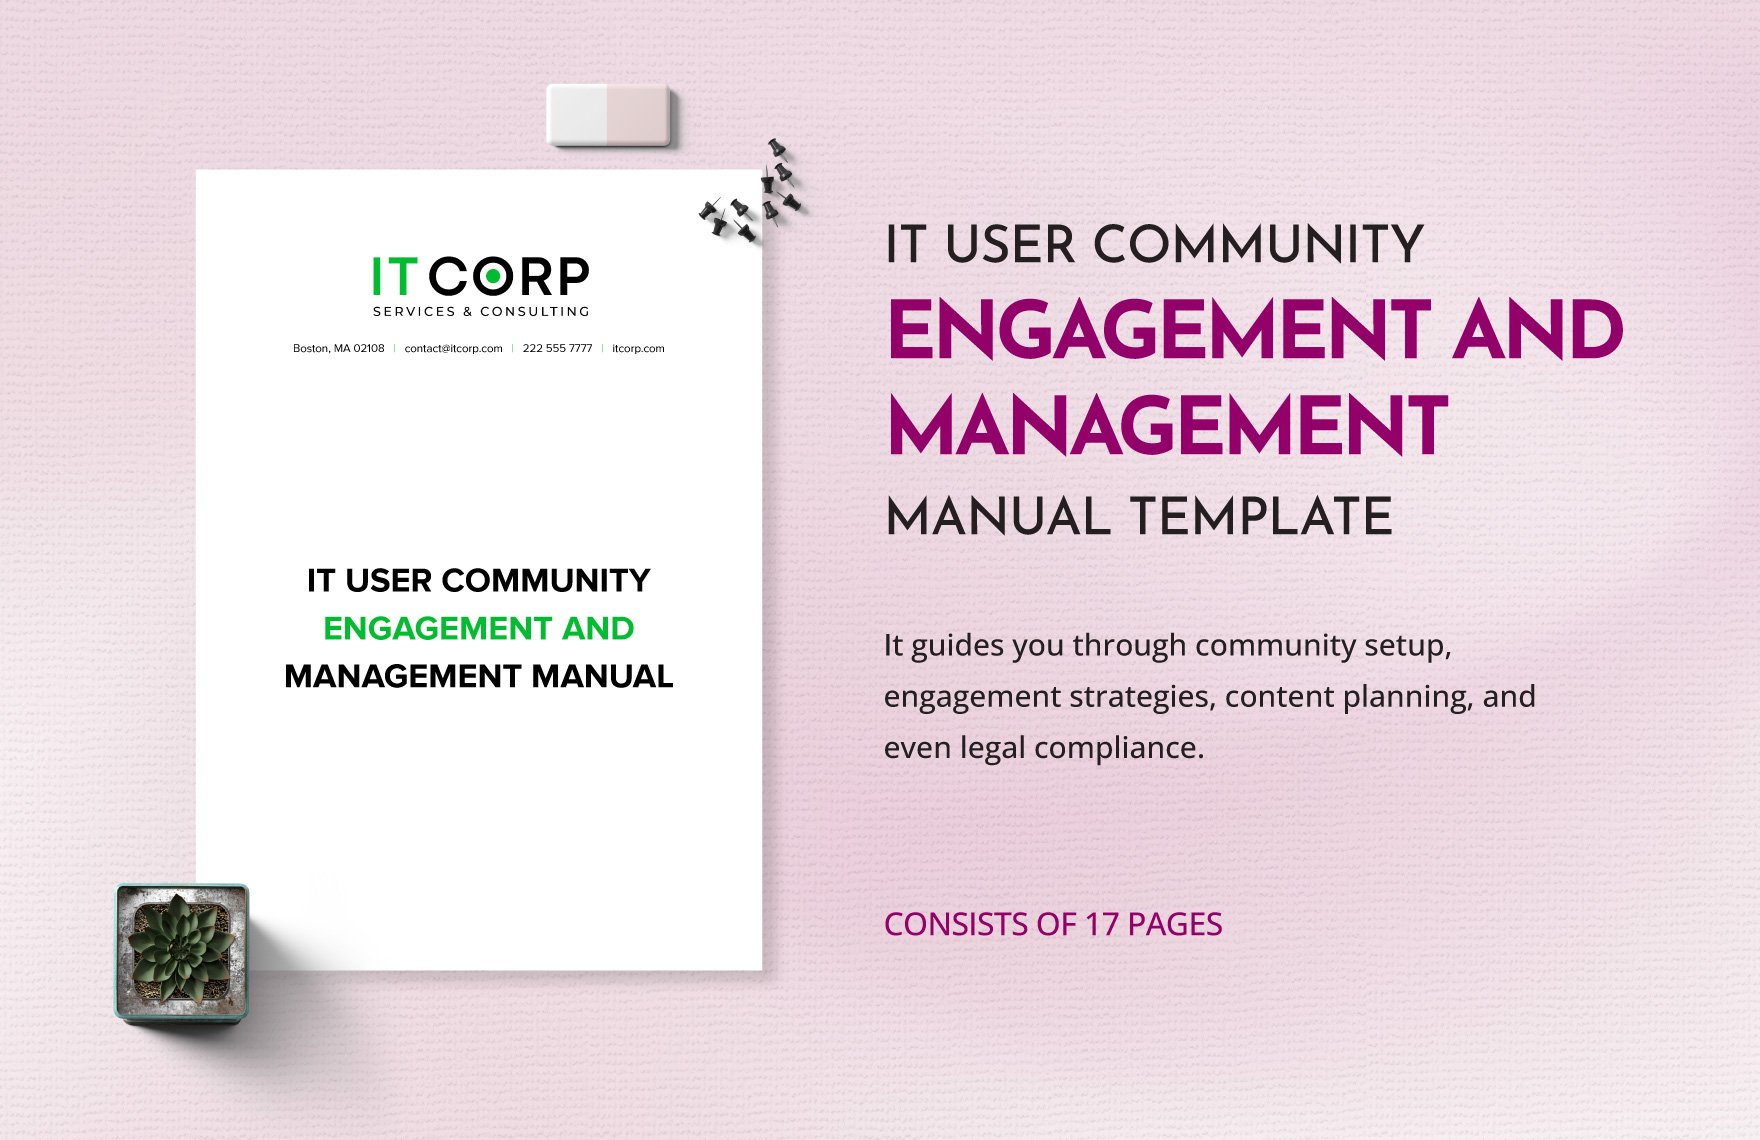 IT User Community Engagement and Management Manual Template